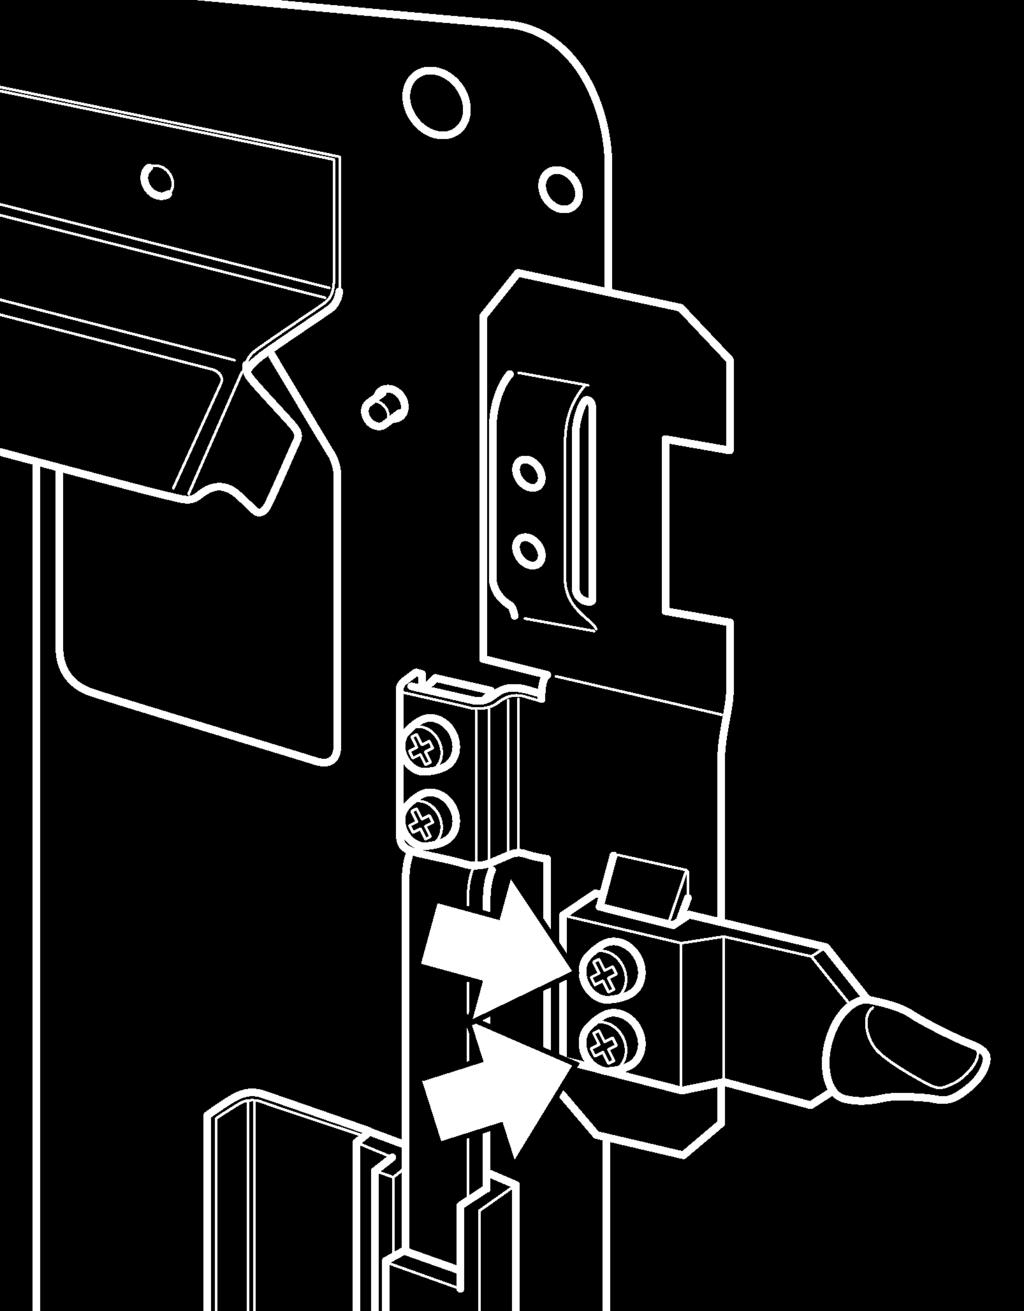 2. Detach the microswitch cover by removing one screw and pulling clear of the location lug. See figure 38